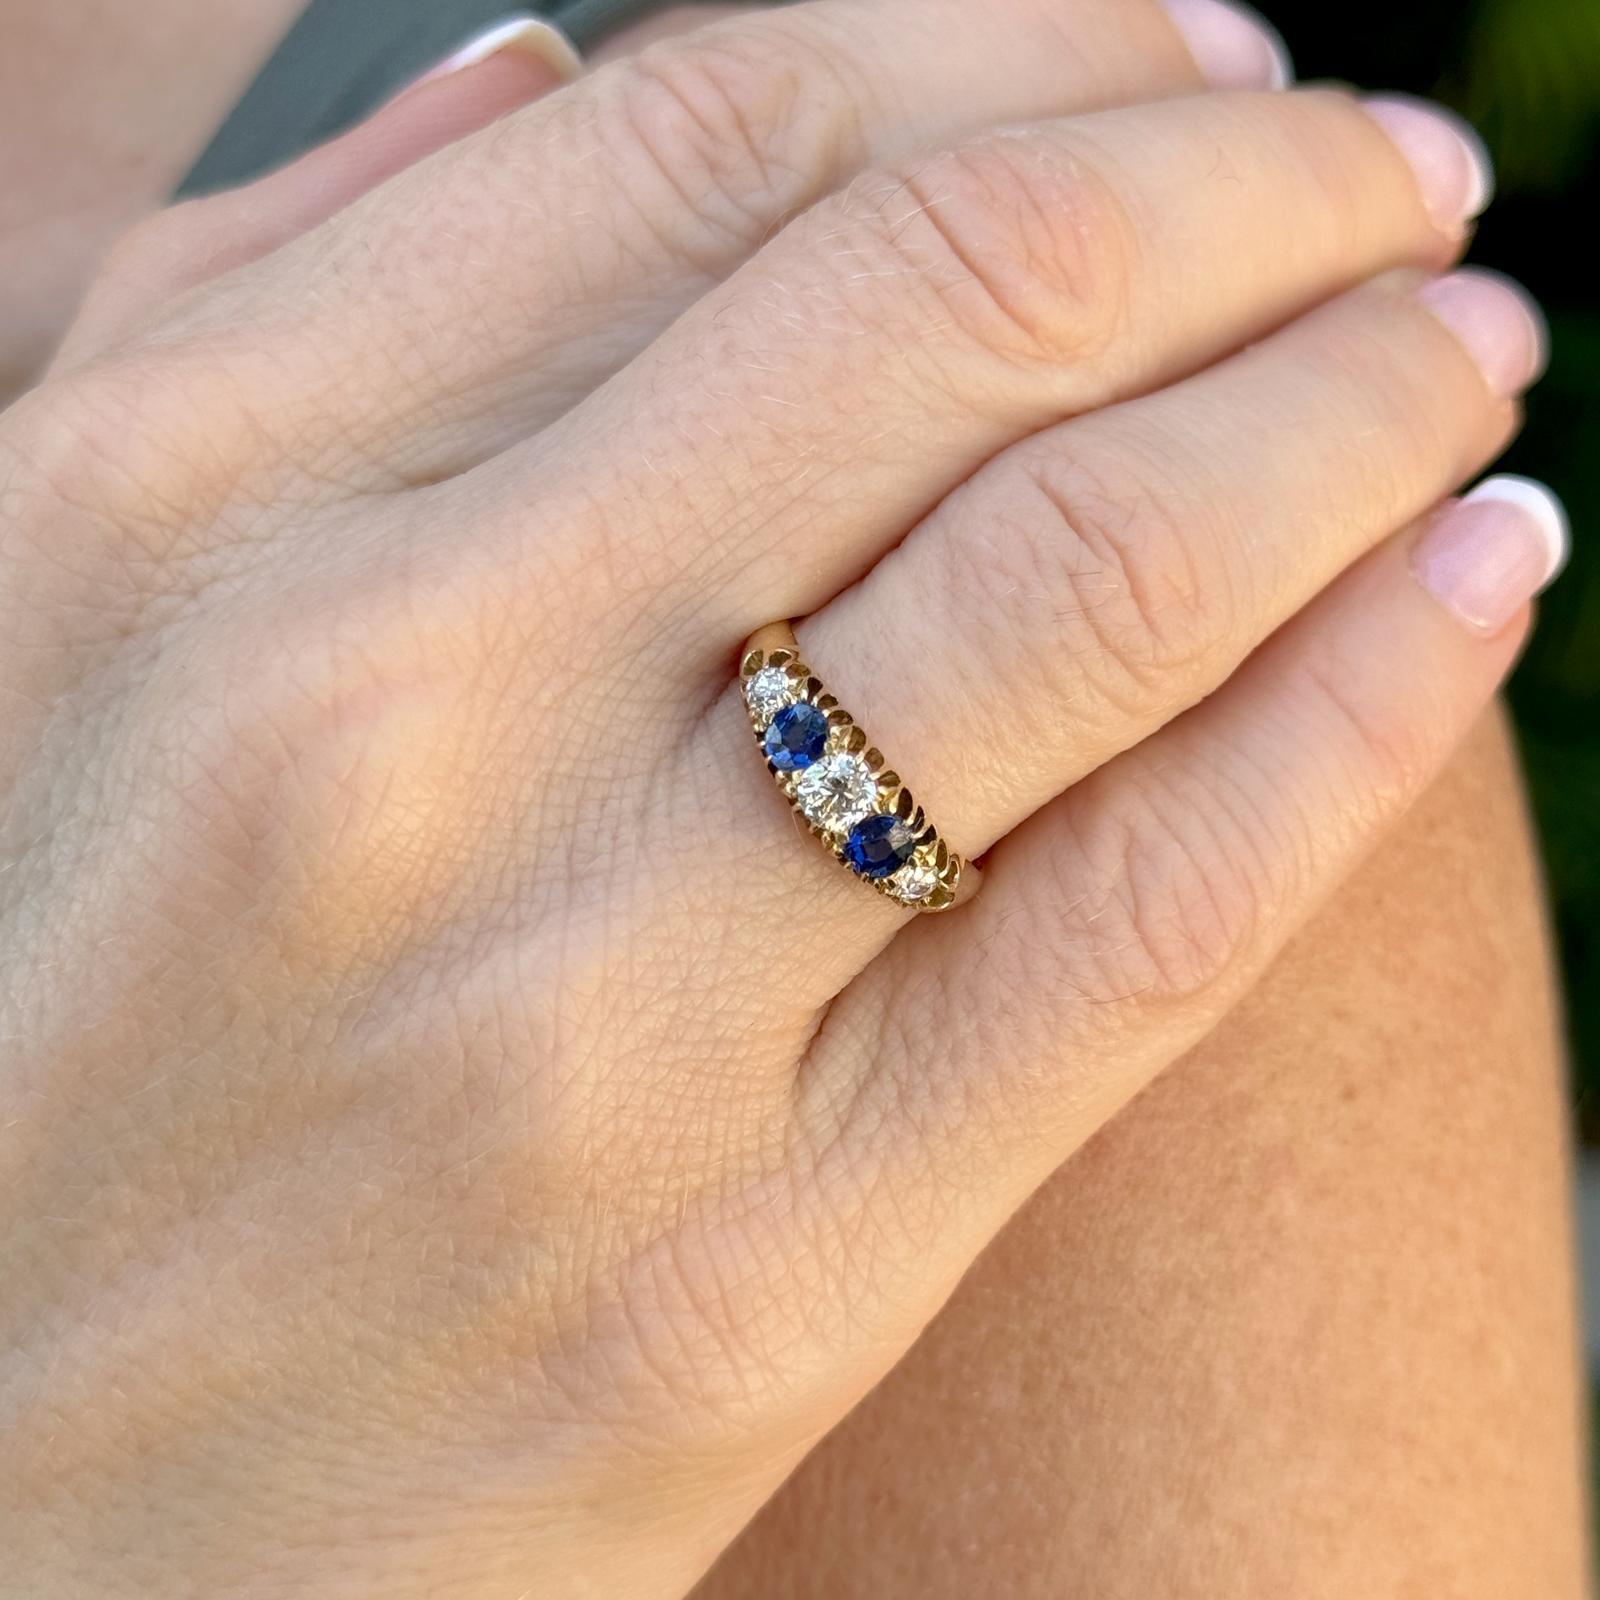 This vintage 5-stone band ring exudes classic beauty and timeless elegance. Crafted from rich 18 karat yellow gold, the ring features a stunning arrangement of 3 old mine cut diamonds and 2 vibrant sapphires. The diamonds weigh approximately .40